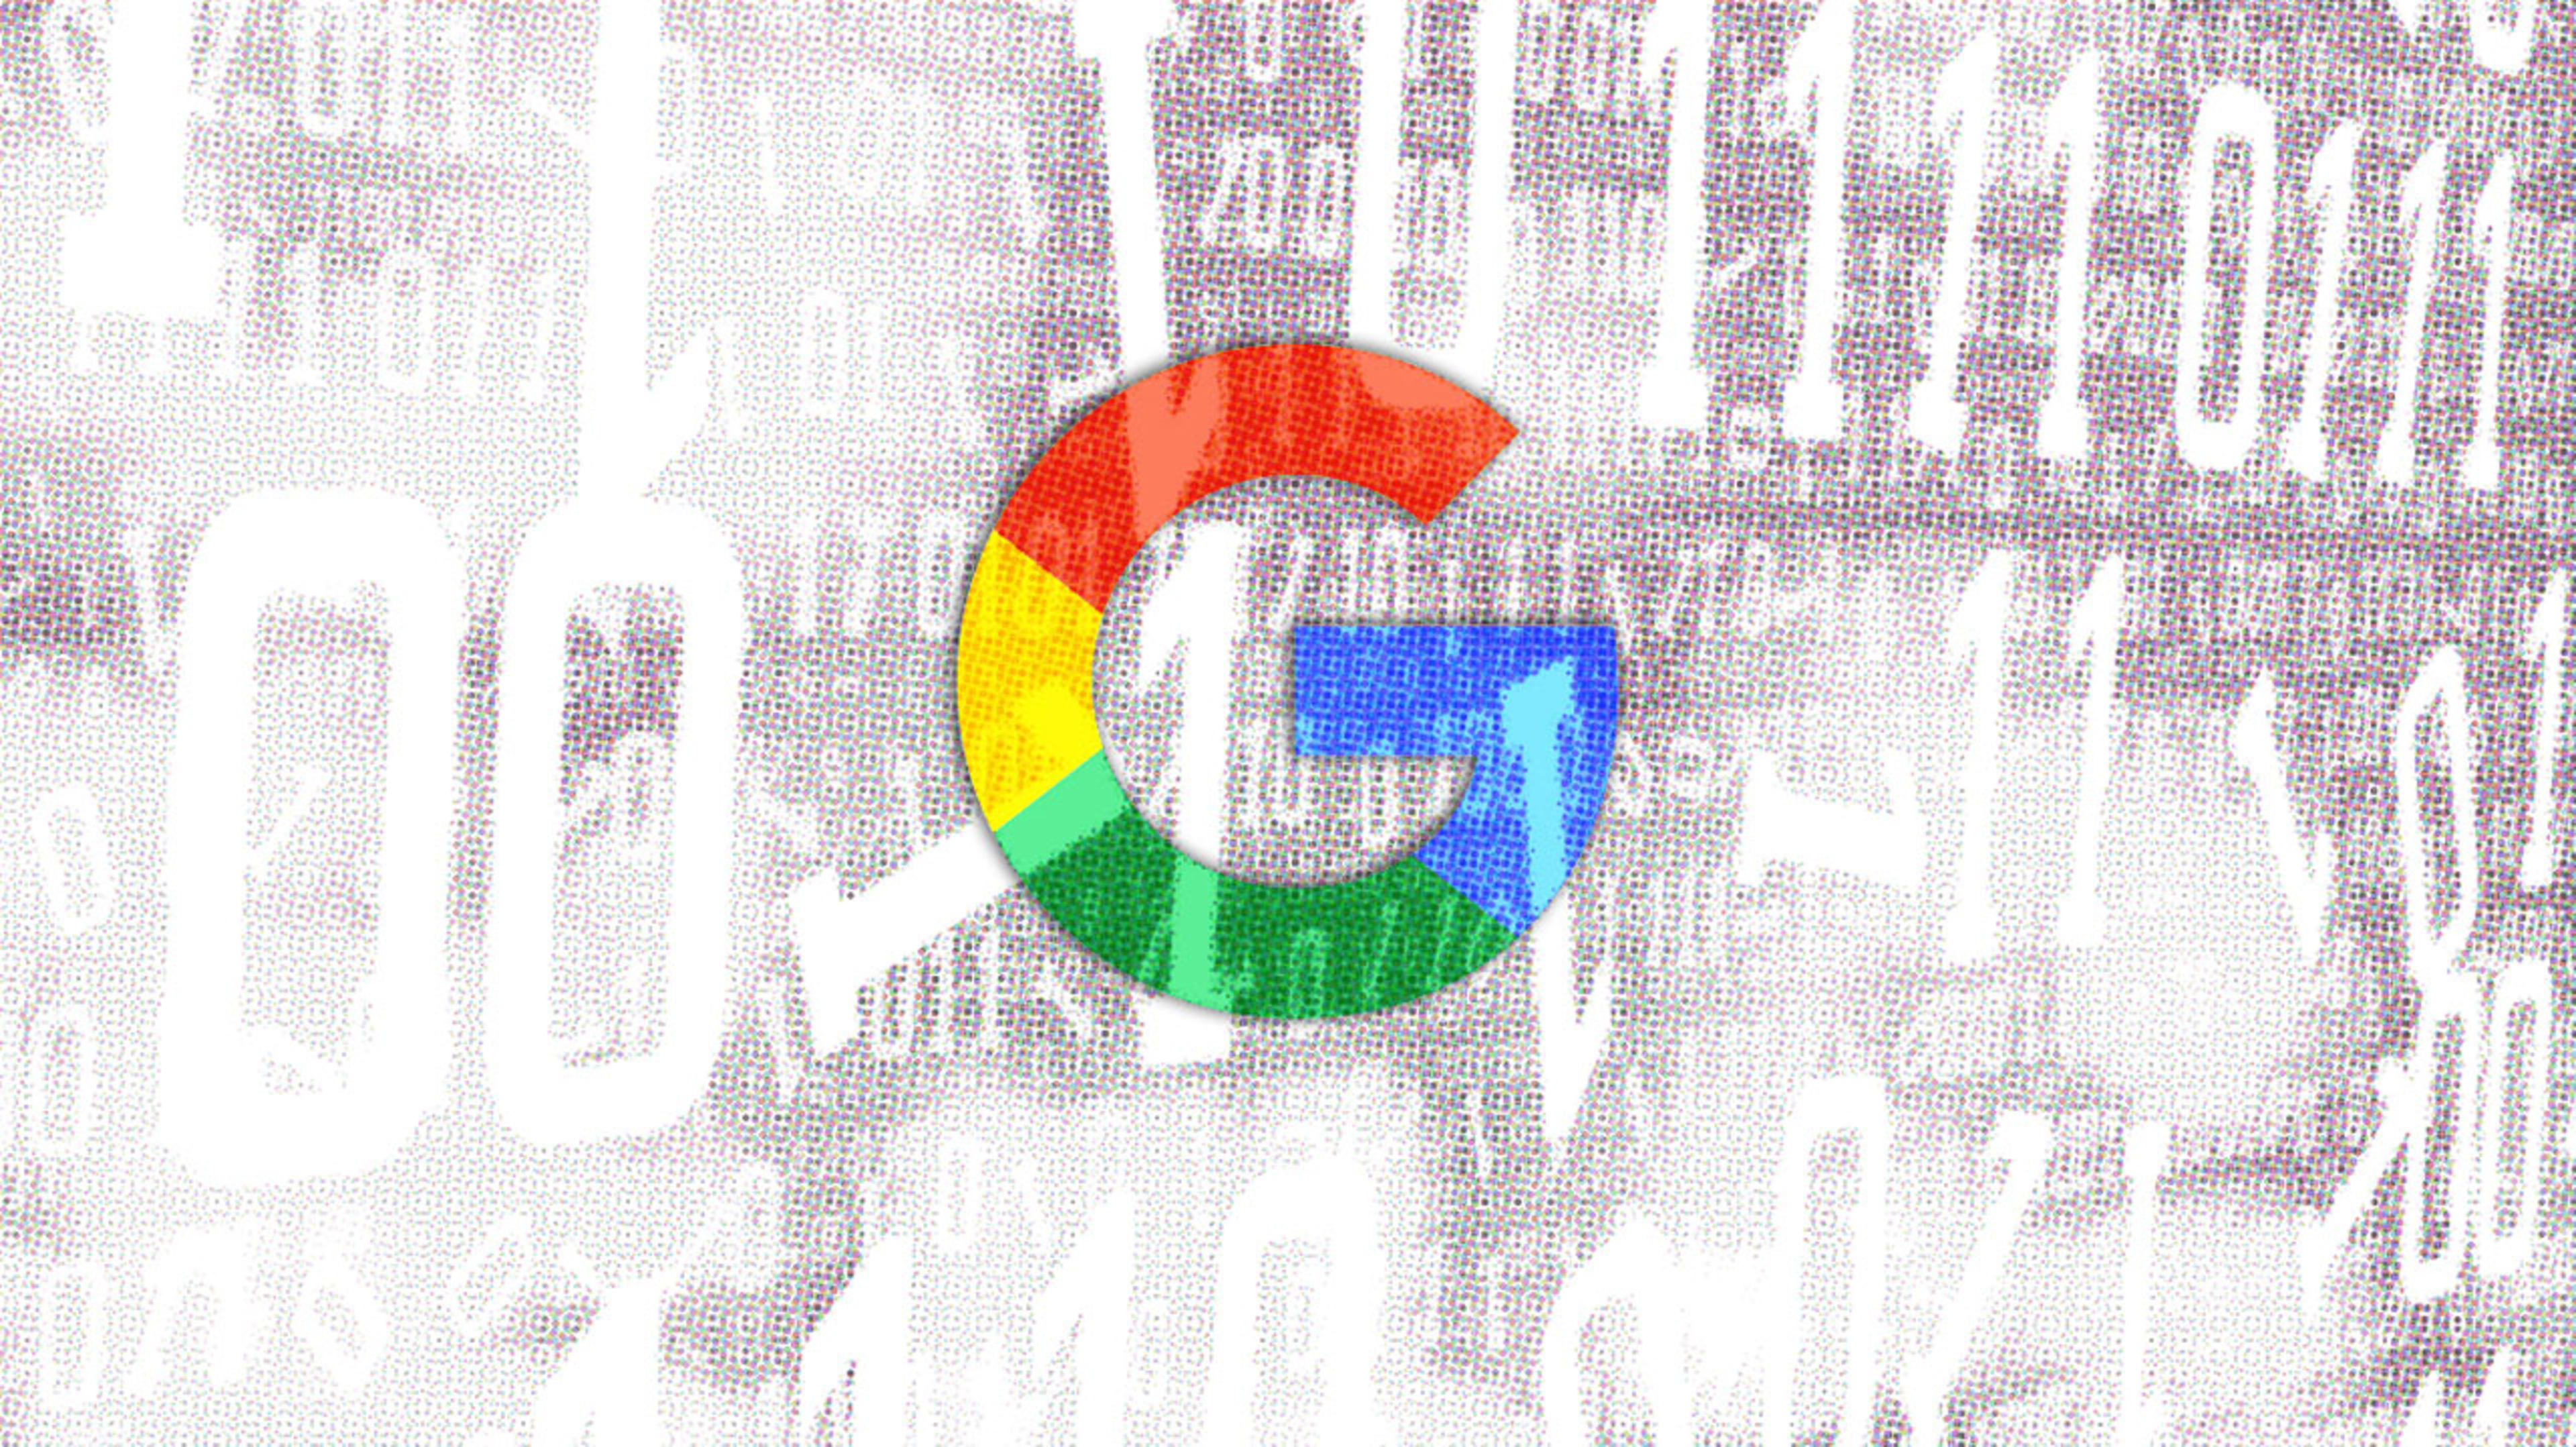 Google’s Tough Choice On How To Warn The World About Massive Security Flaws